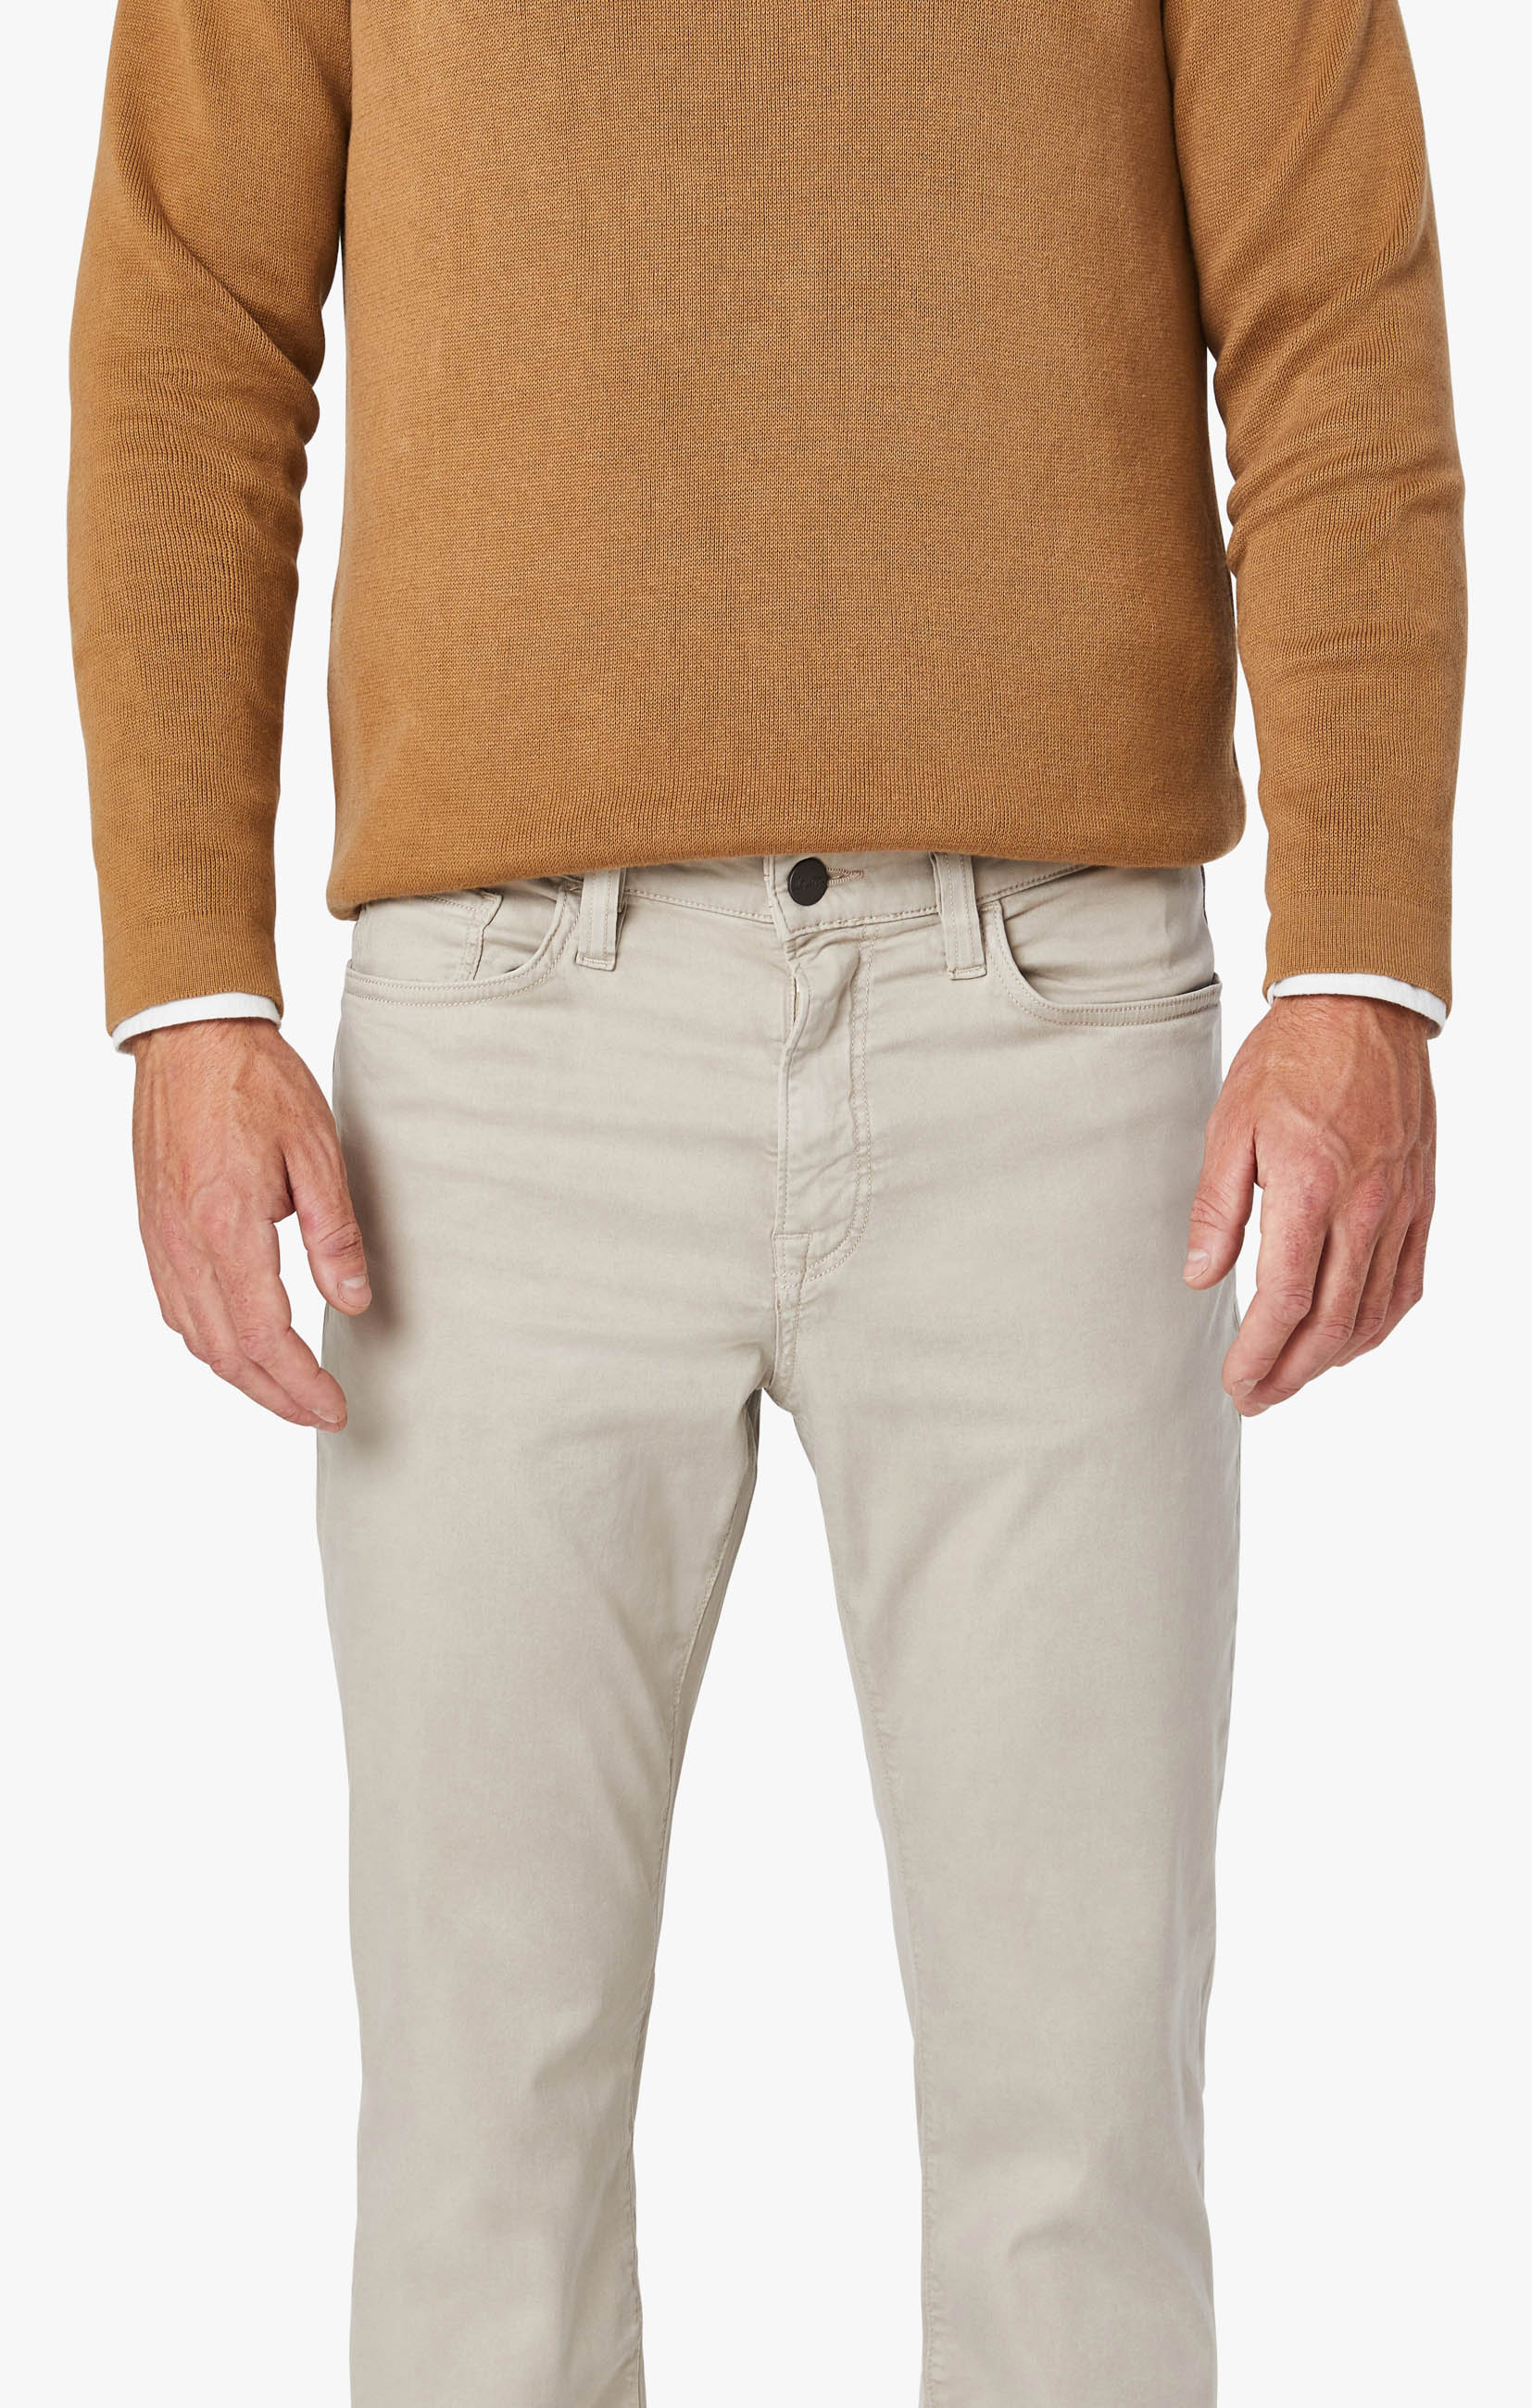 Charisma Relaxed Straight Leg Pants in Dawn Twill Image 7